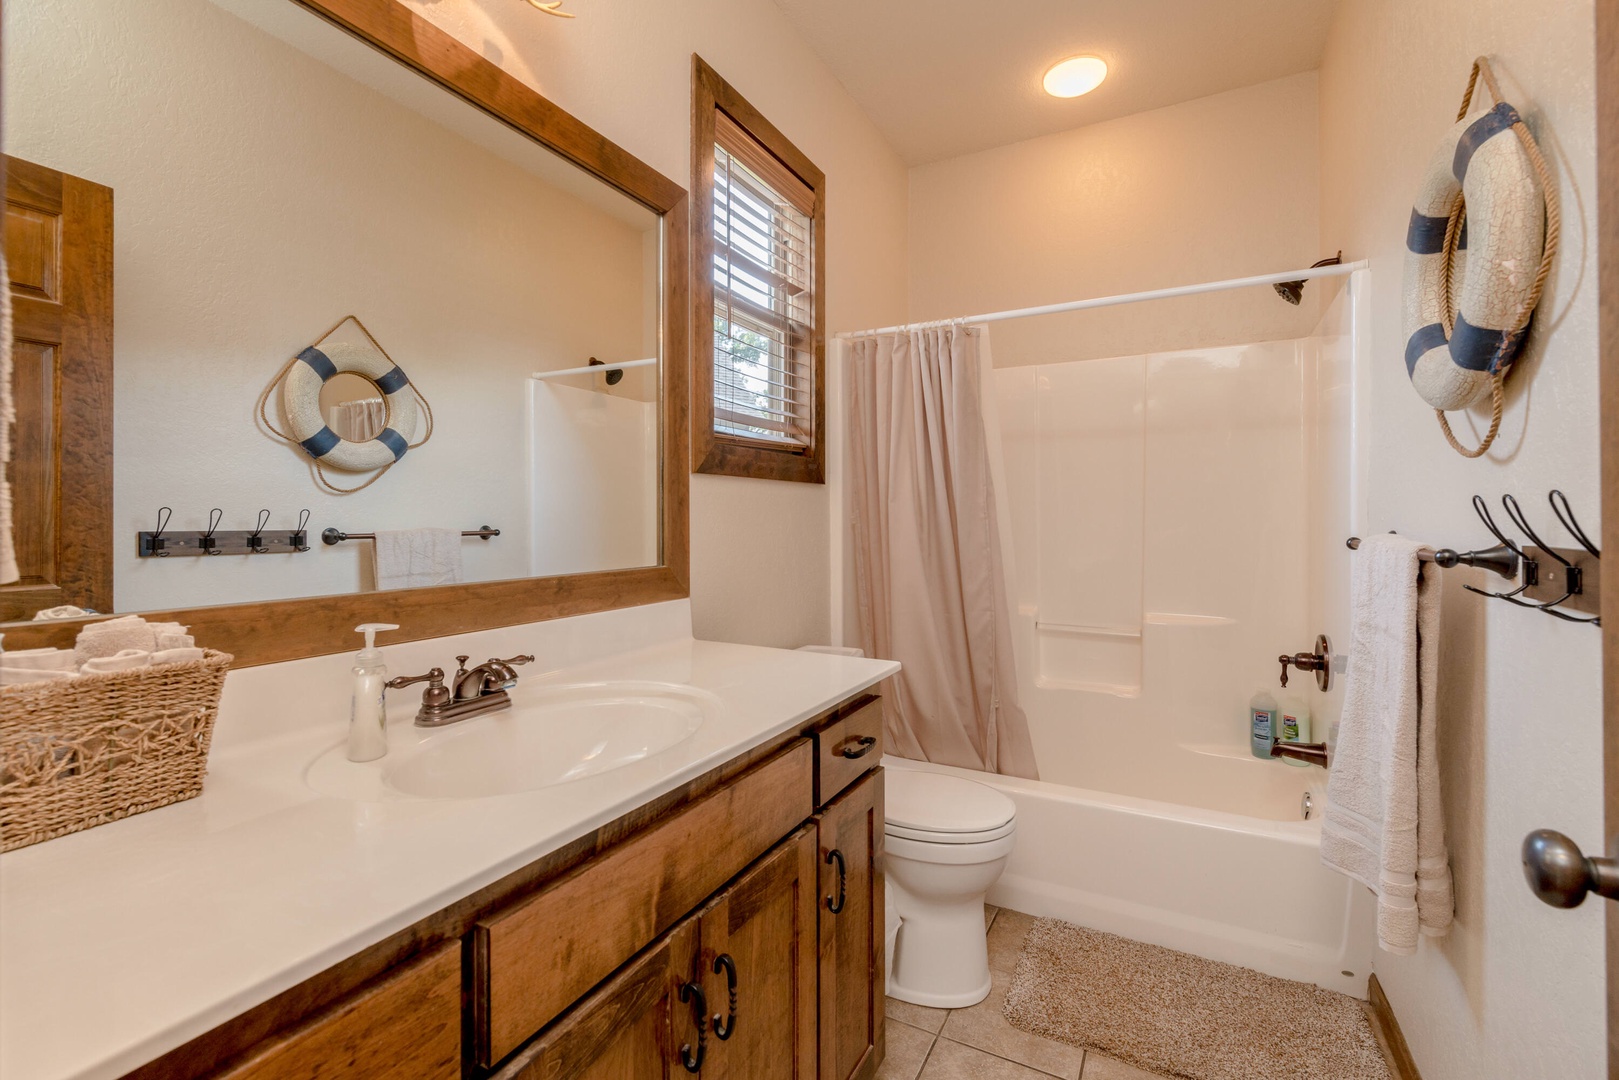 Shared bathroom with shower/tub combo (first floor)